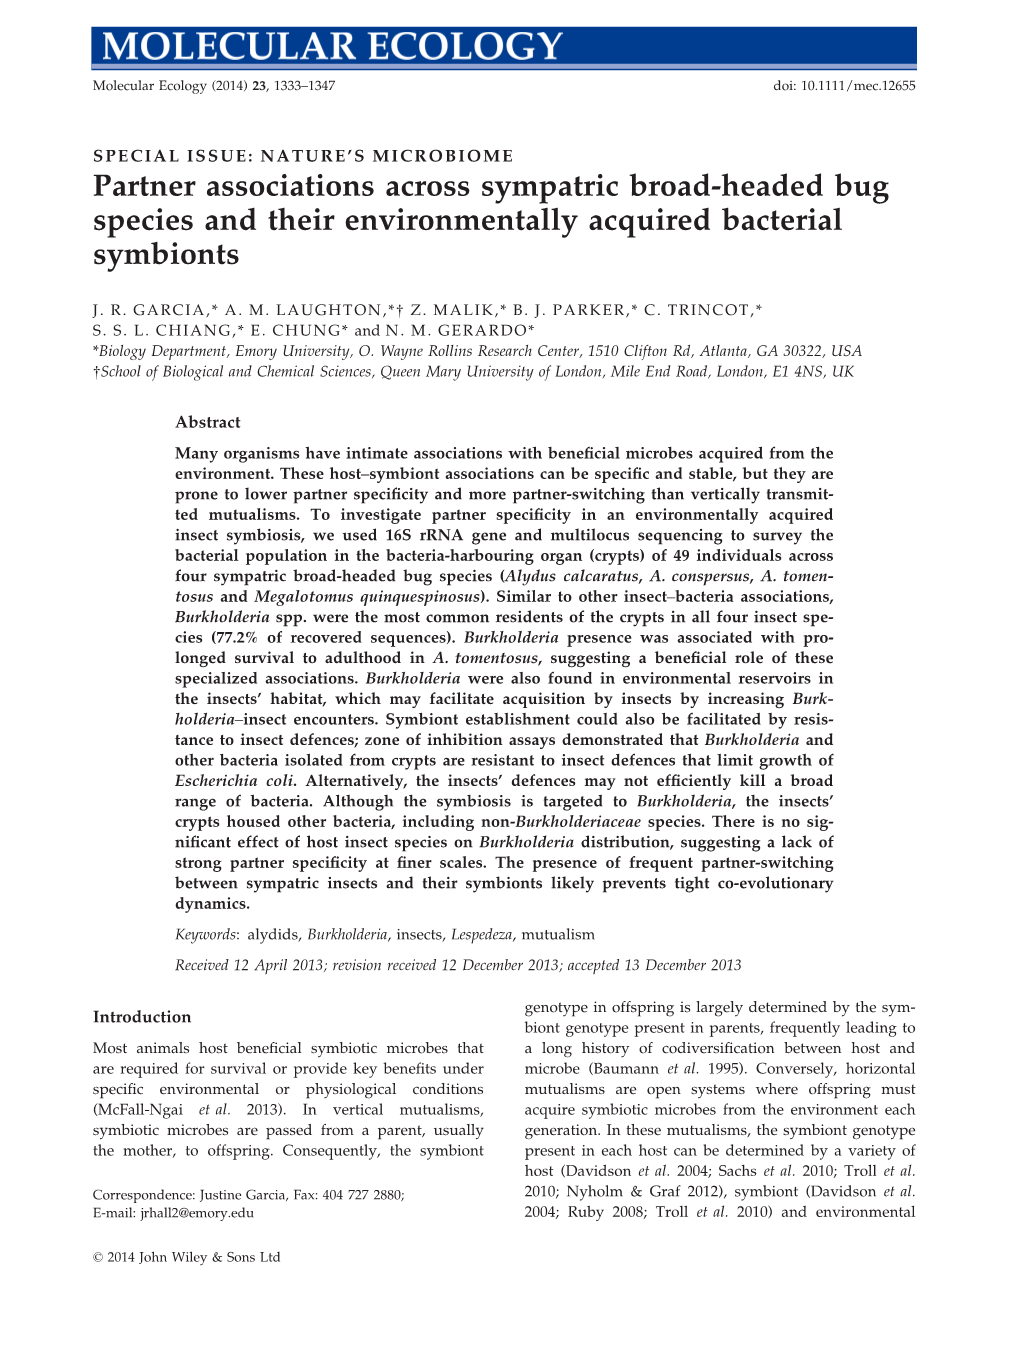 Partner Associations Across Sympatric Broadheaded Bug Species and Their